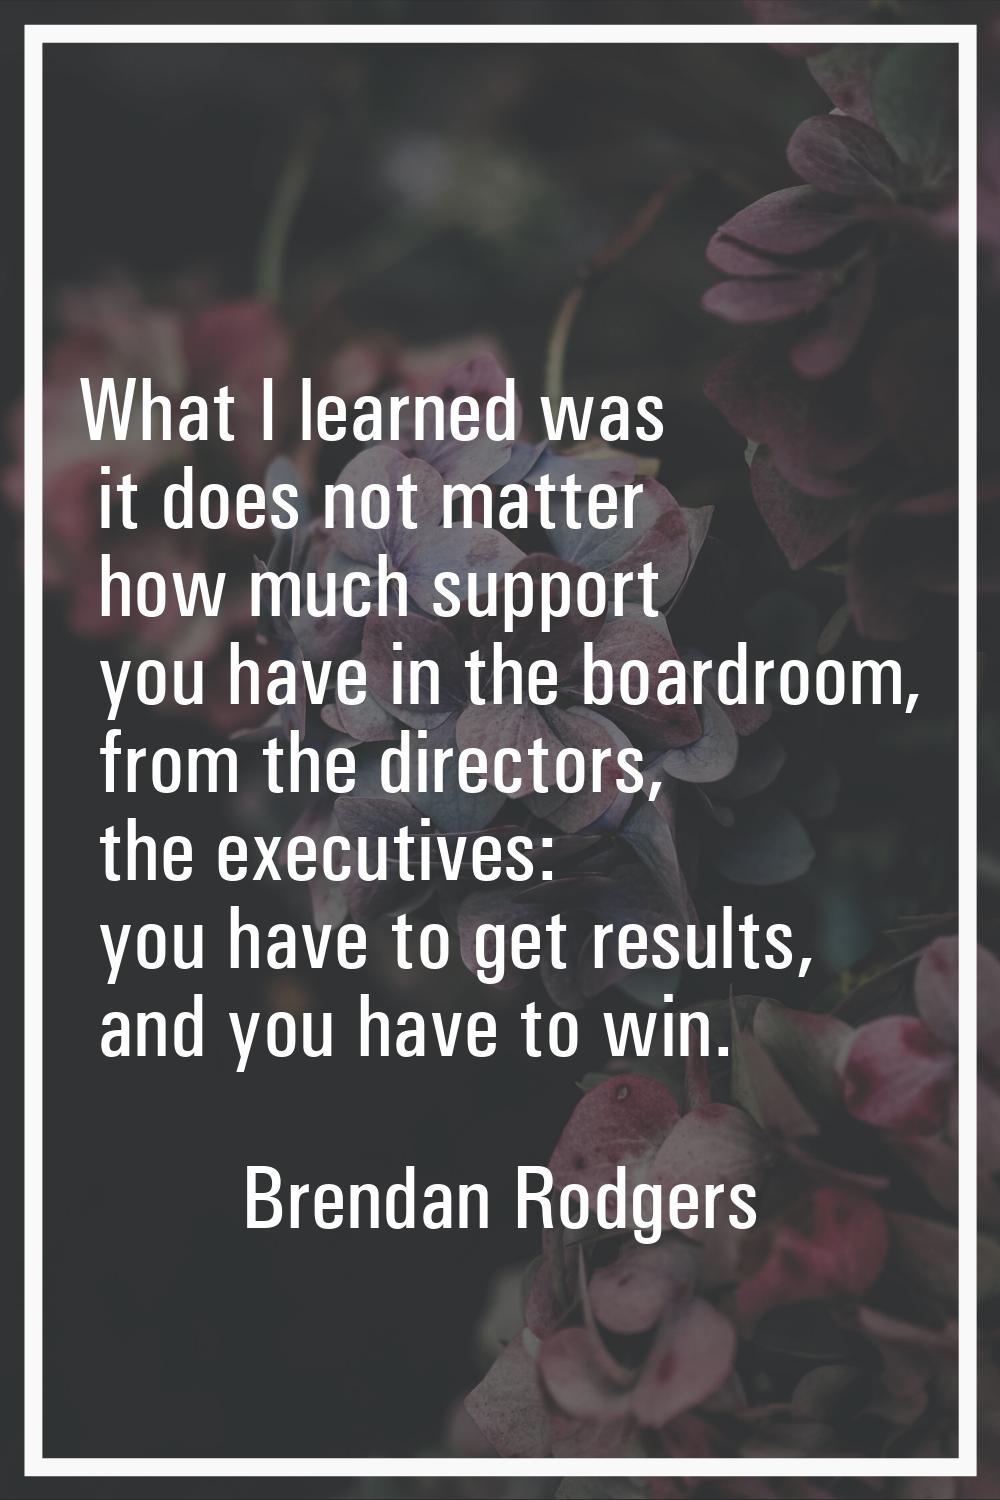 What I learned was it does not matter how much support you have in the boardroom, from the director